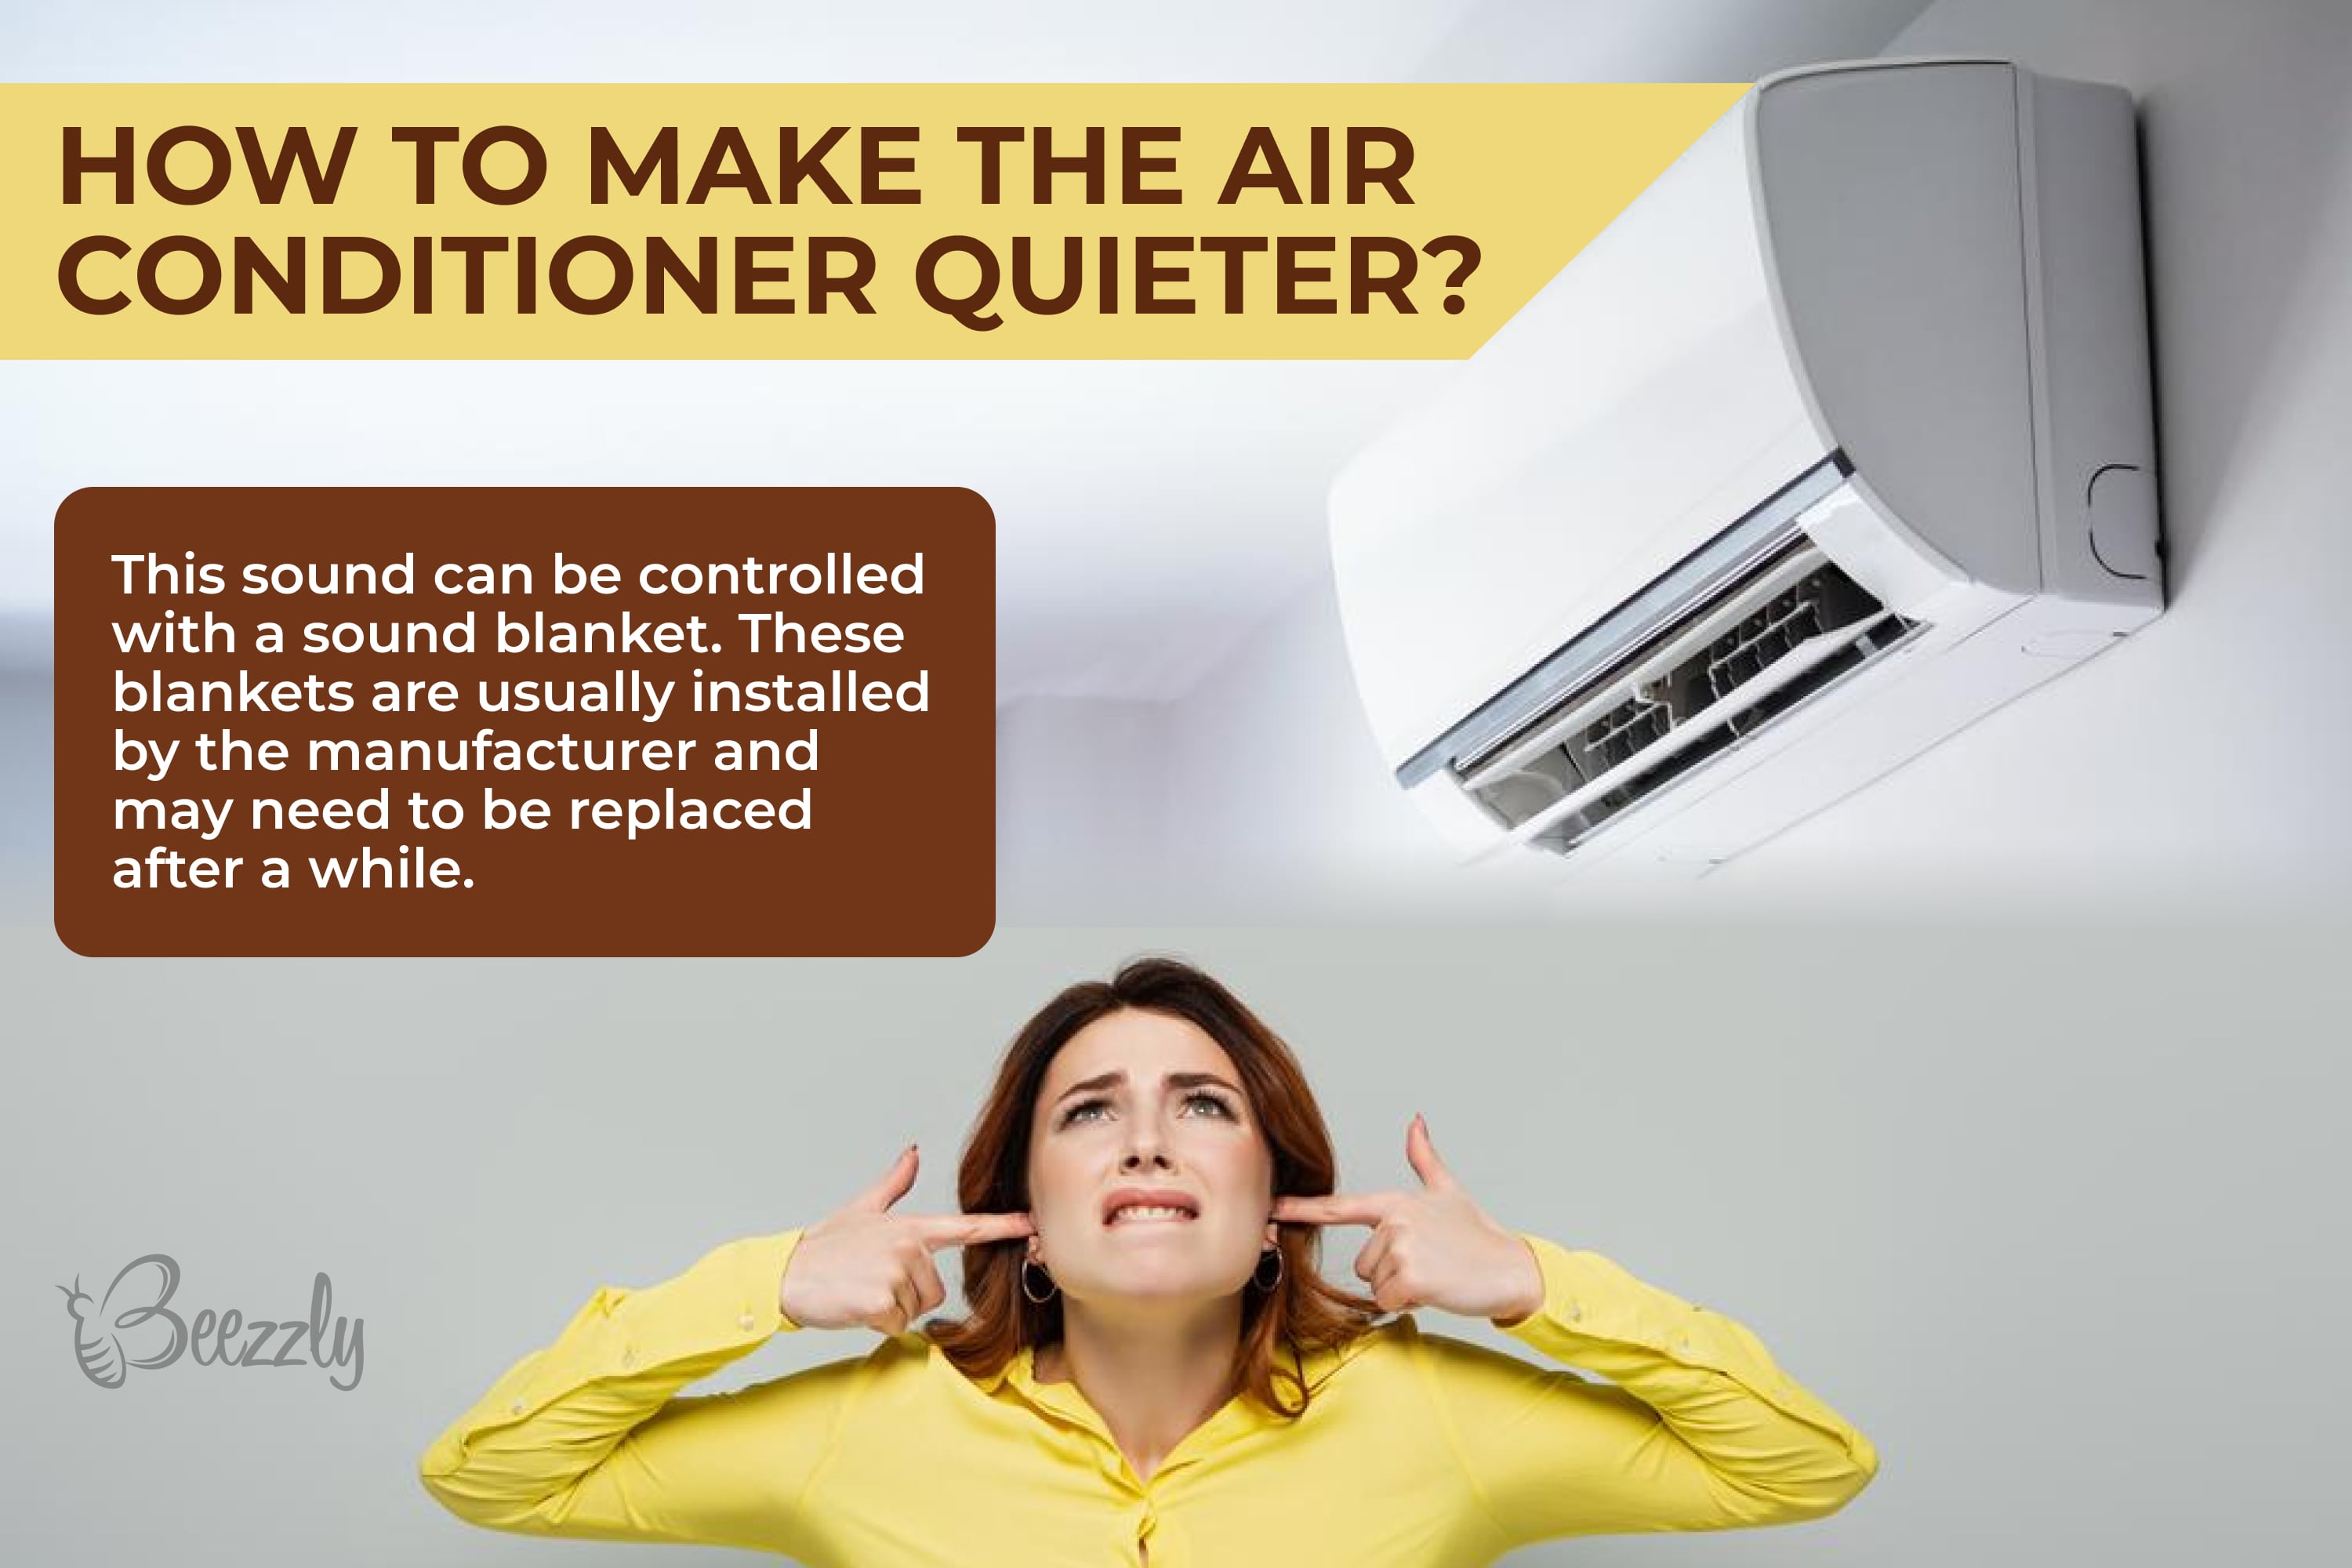 How to make the air conditioner quieter